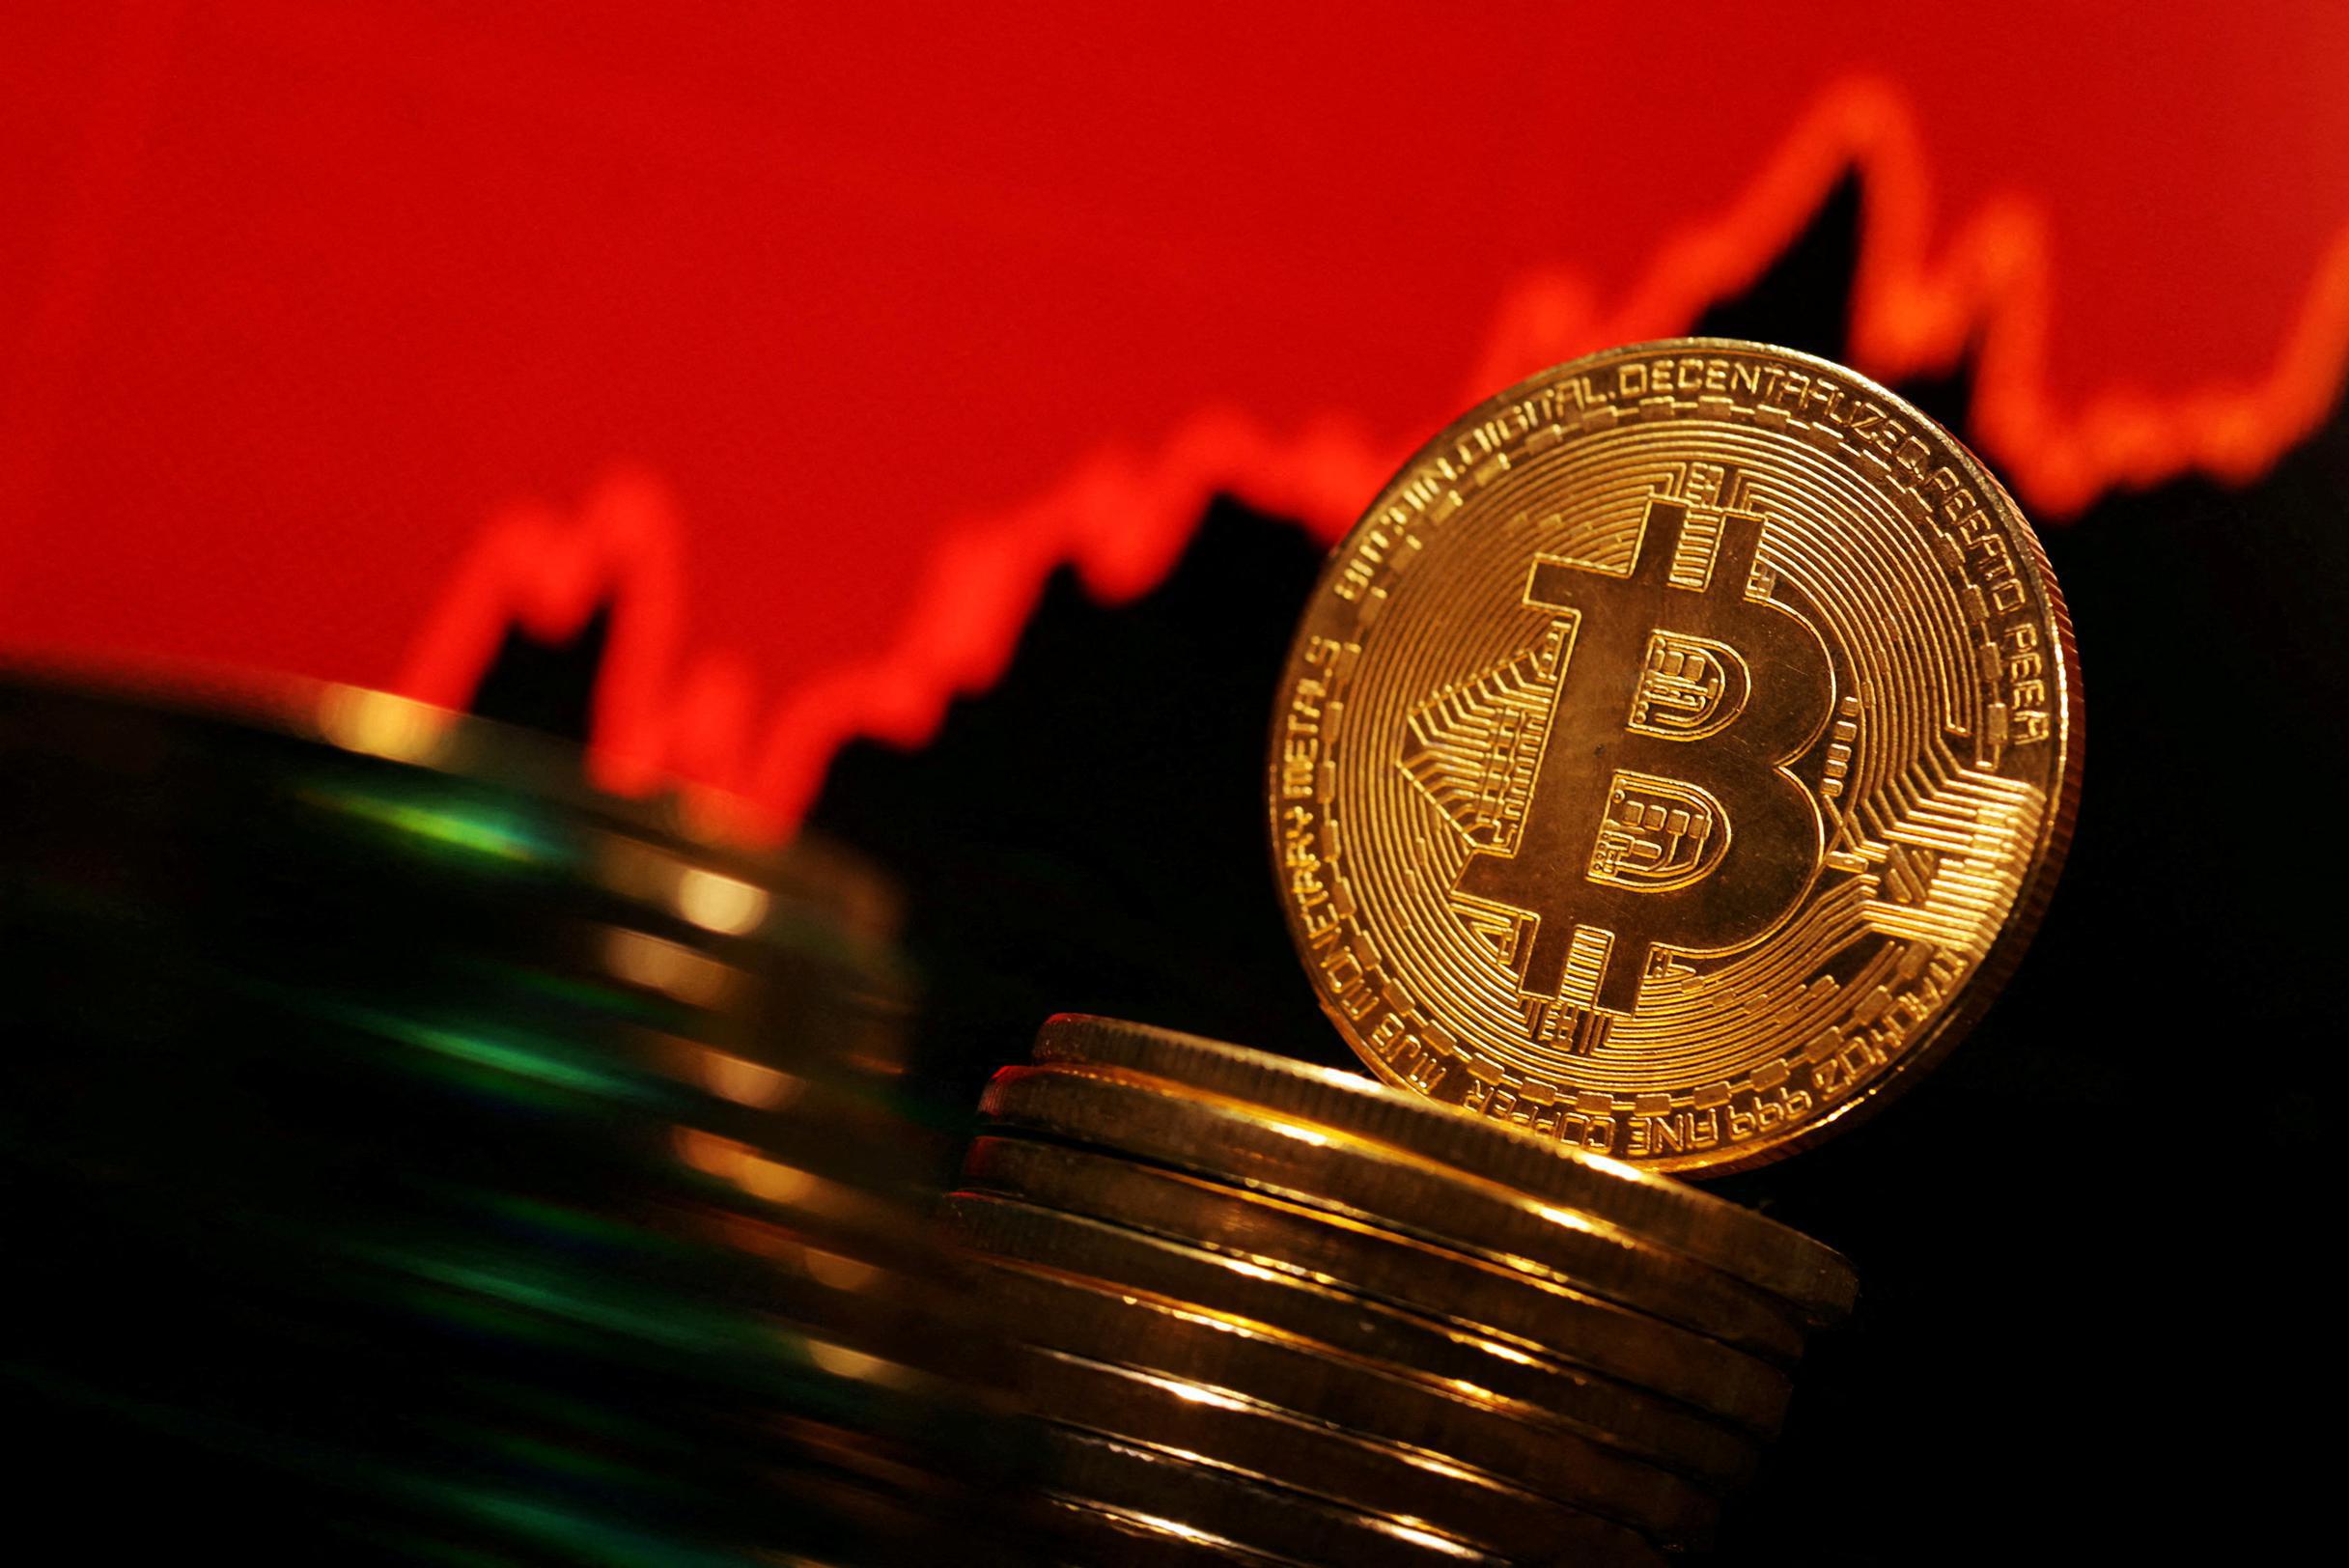 Cryptocurrency Bitcoin Surges to Record High of $69,000 in November 2021 Amid Investor Demand